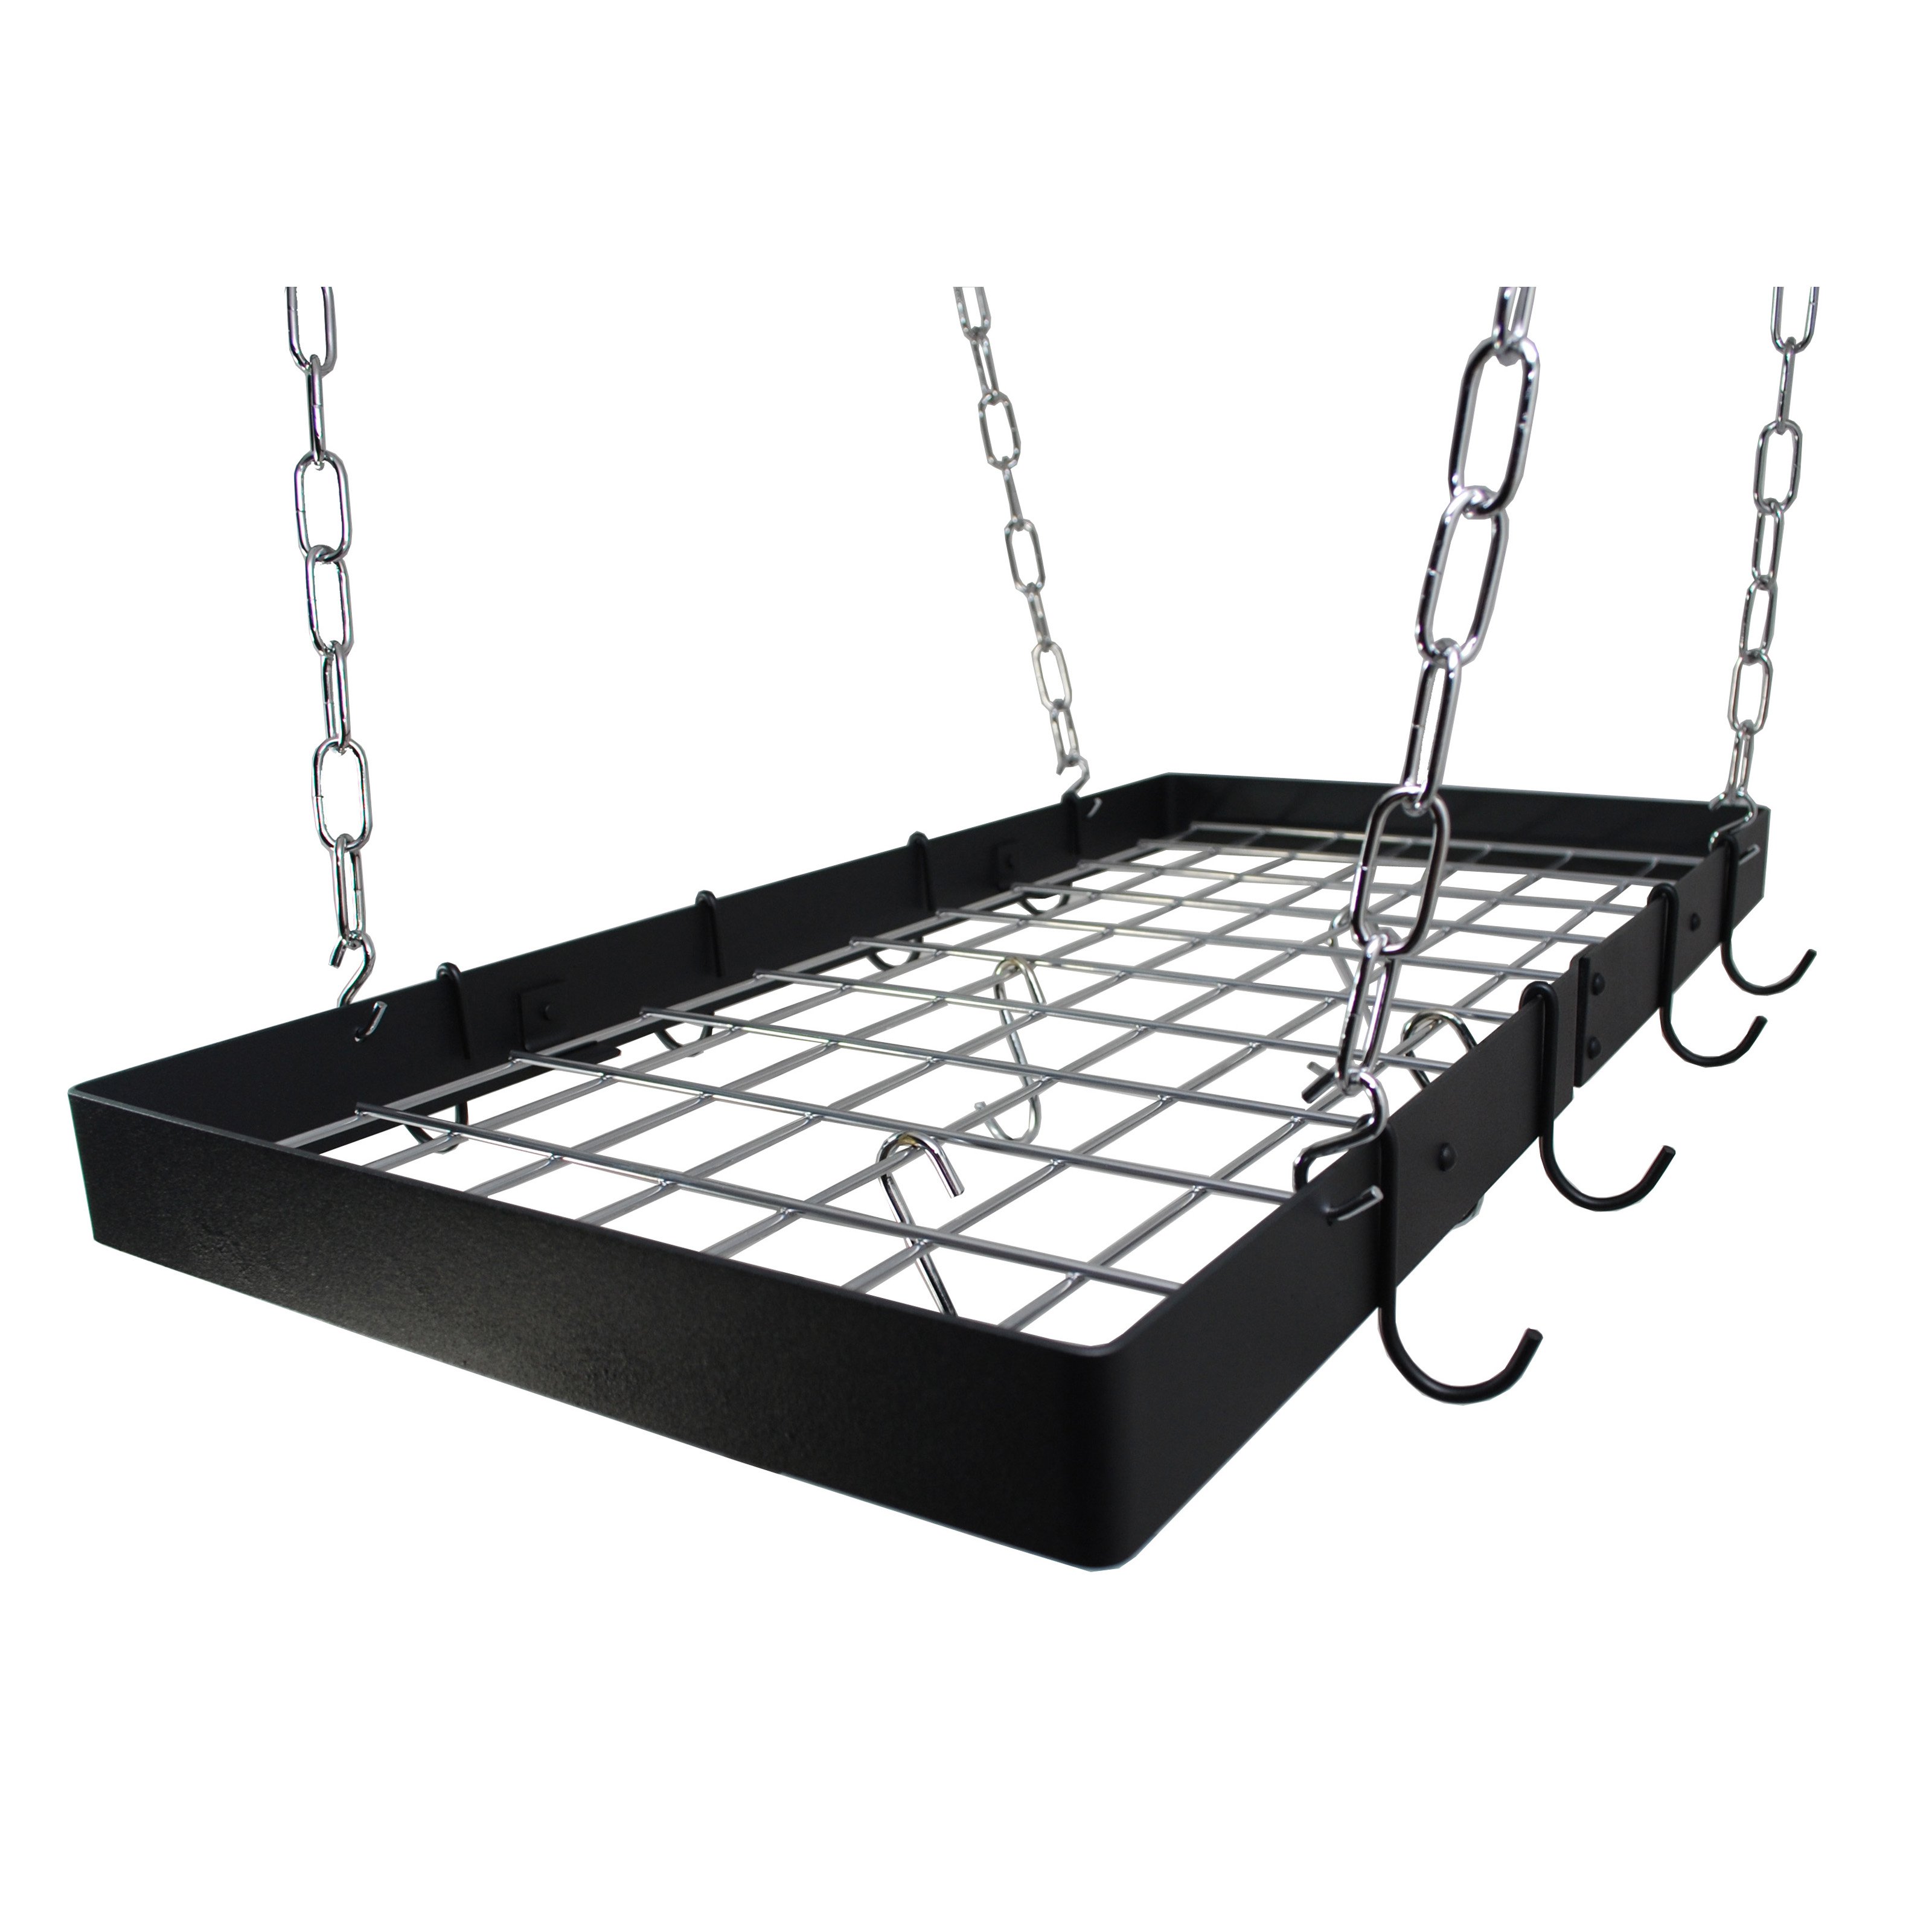 The Gourmet Rectangle Kitchen Pot Rack with Grid - image 4 of 8